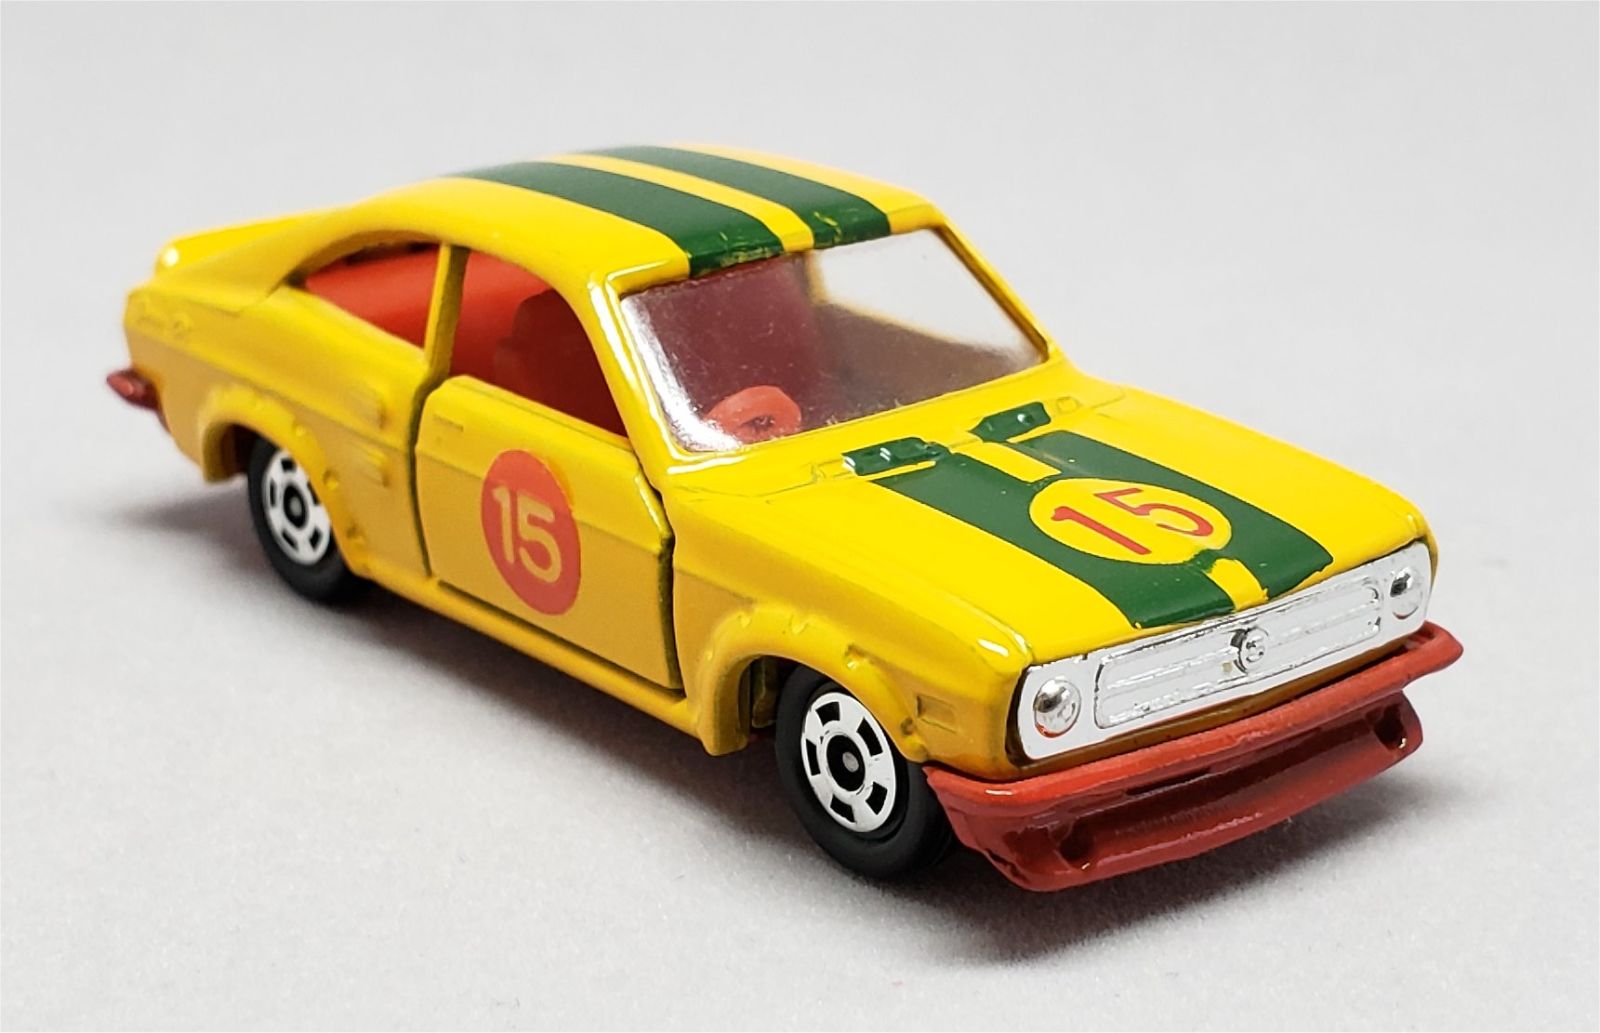 Illustration for article titled [REVIEW] Tomica Datsun Sunny 1200 Coupe Racing